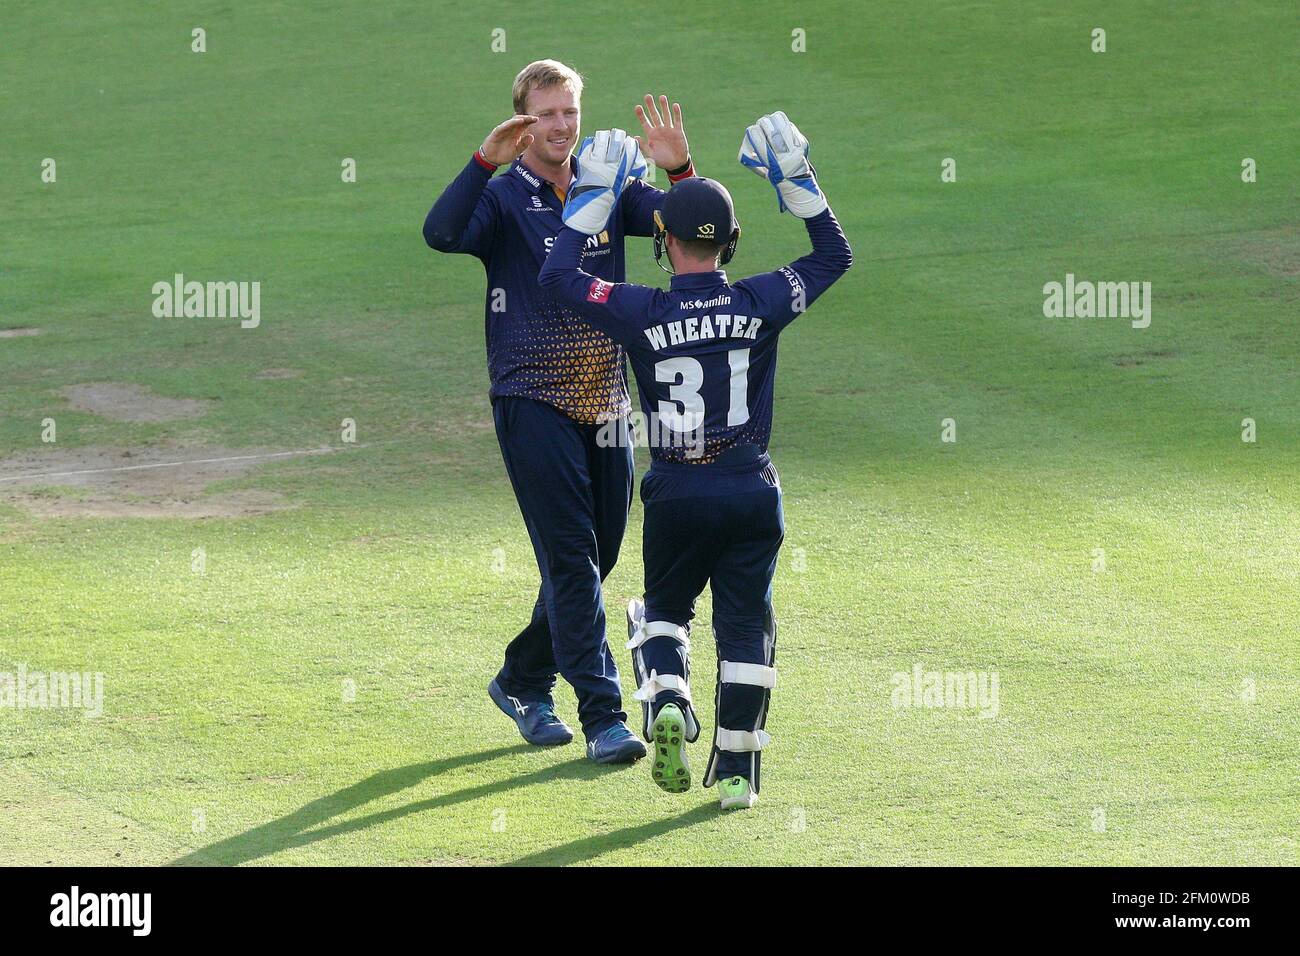 Simon Harmer celebrates taking the wicket of Middlesex batsman John Simpson during Middlesex vs Essex Eagles, Vitality Blast T20 Cricket at Lord's Cri Stock Photo